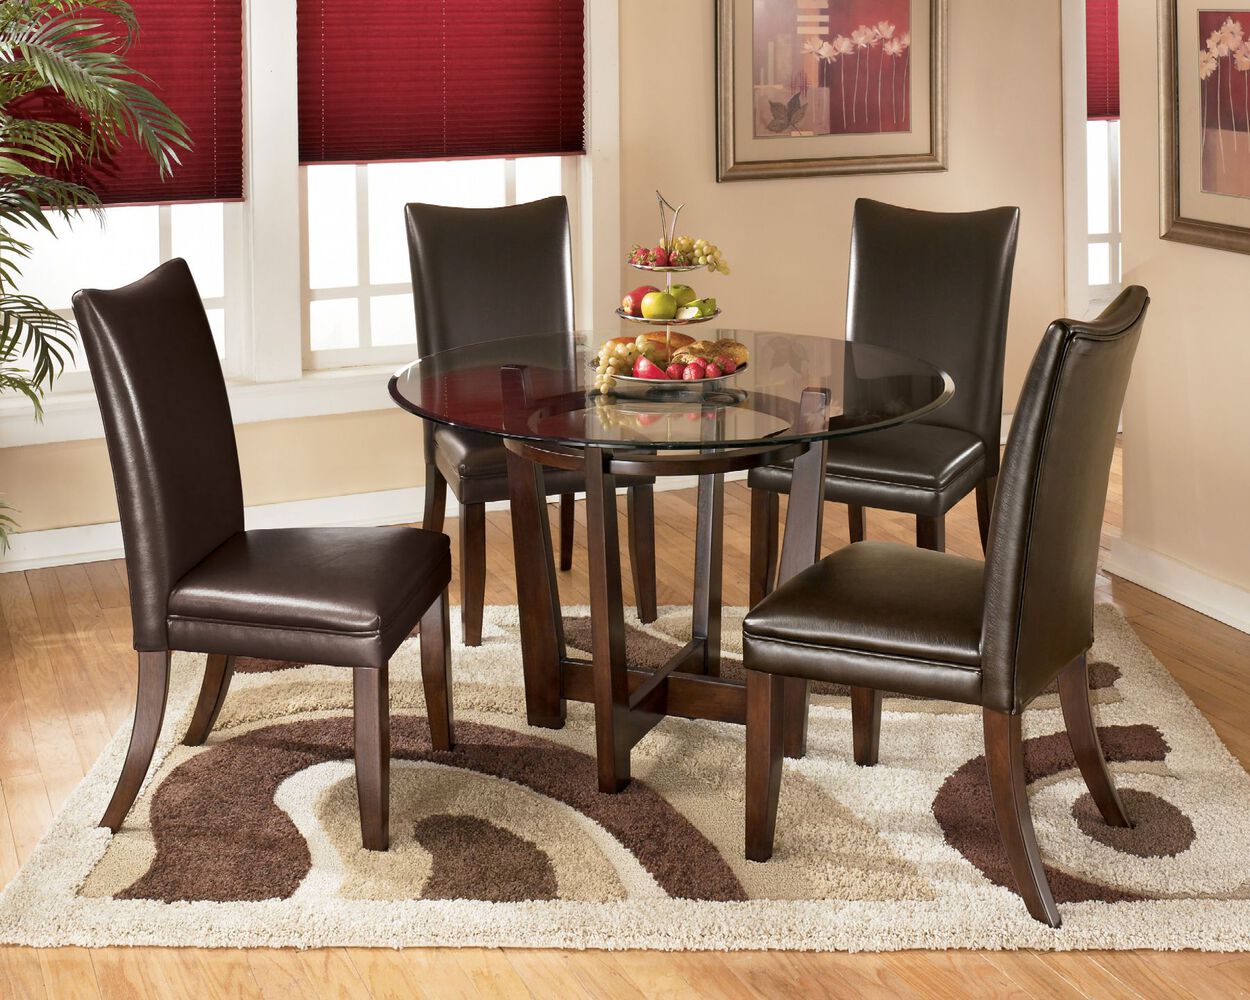 Contemporary 45 Beveled Glass Dining Table In Medium Brown